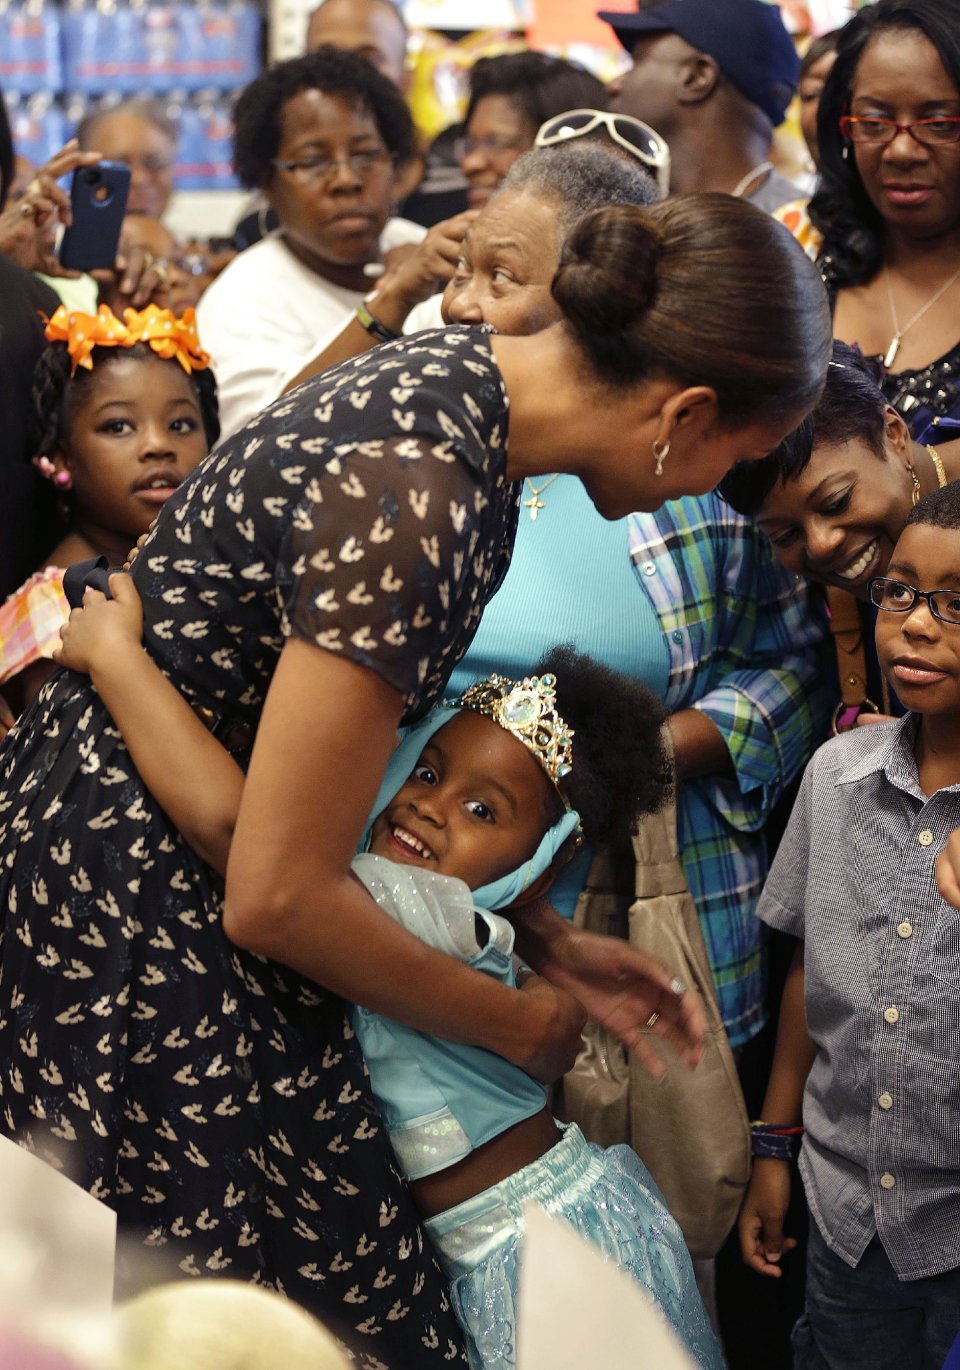 First lady Michelle Obama hugs Naomi Bouie, 5, during her visit to Sterling Farms Grocery Store in Marrero, La., Tuesday, July 23, 2013. The store was opened last year by actor Wendell Pierce as part of the "Alliance For A Healthier Generation," Earlier she spoke about childhood obesity at the annual meeting of the National Council of La Raza. (AP Photo/Gerald Herbert)